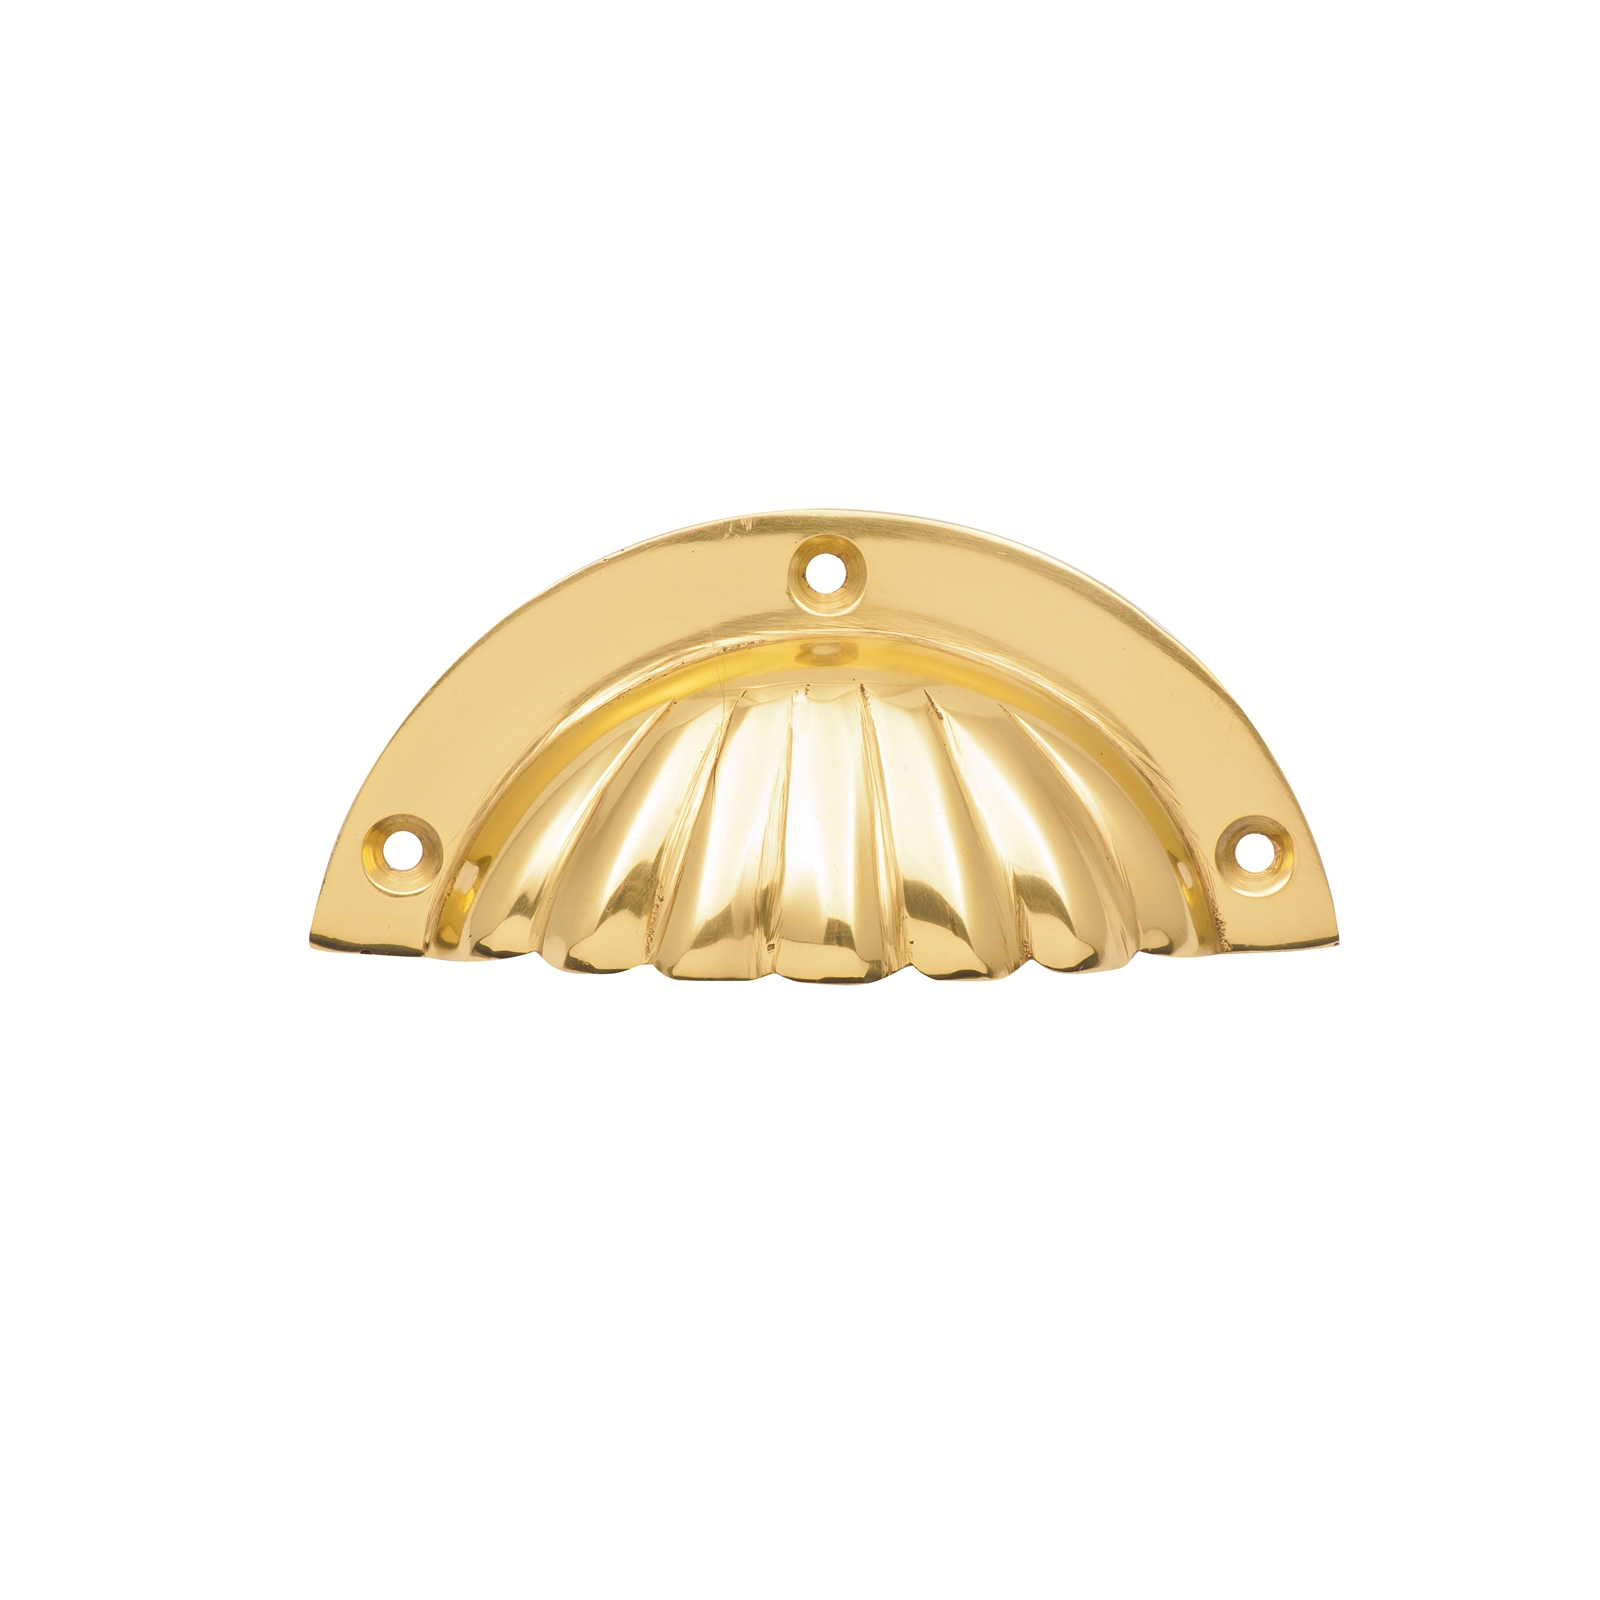 Prestige Brass Shell Cup Drawer Pull Handle